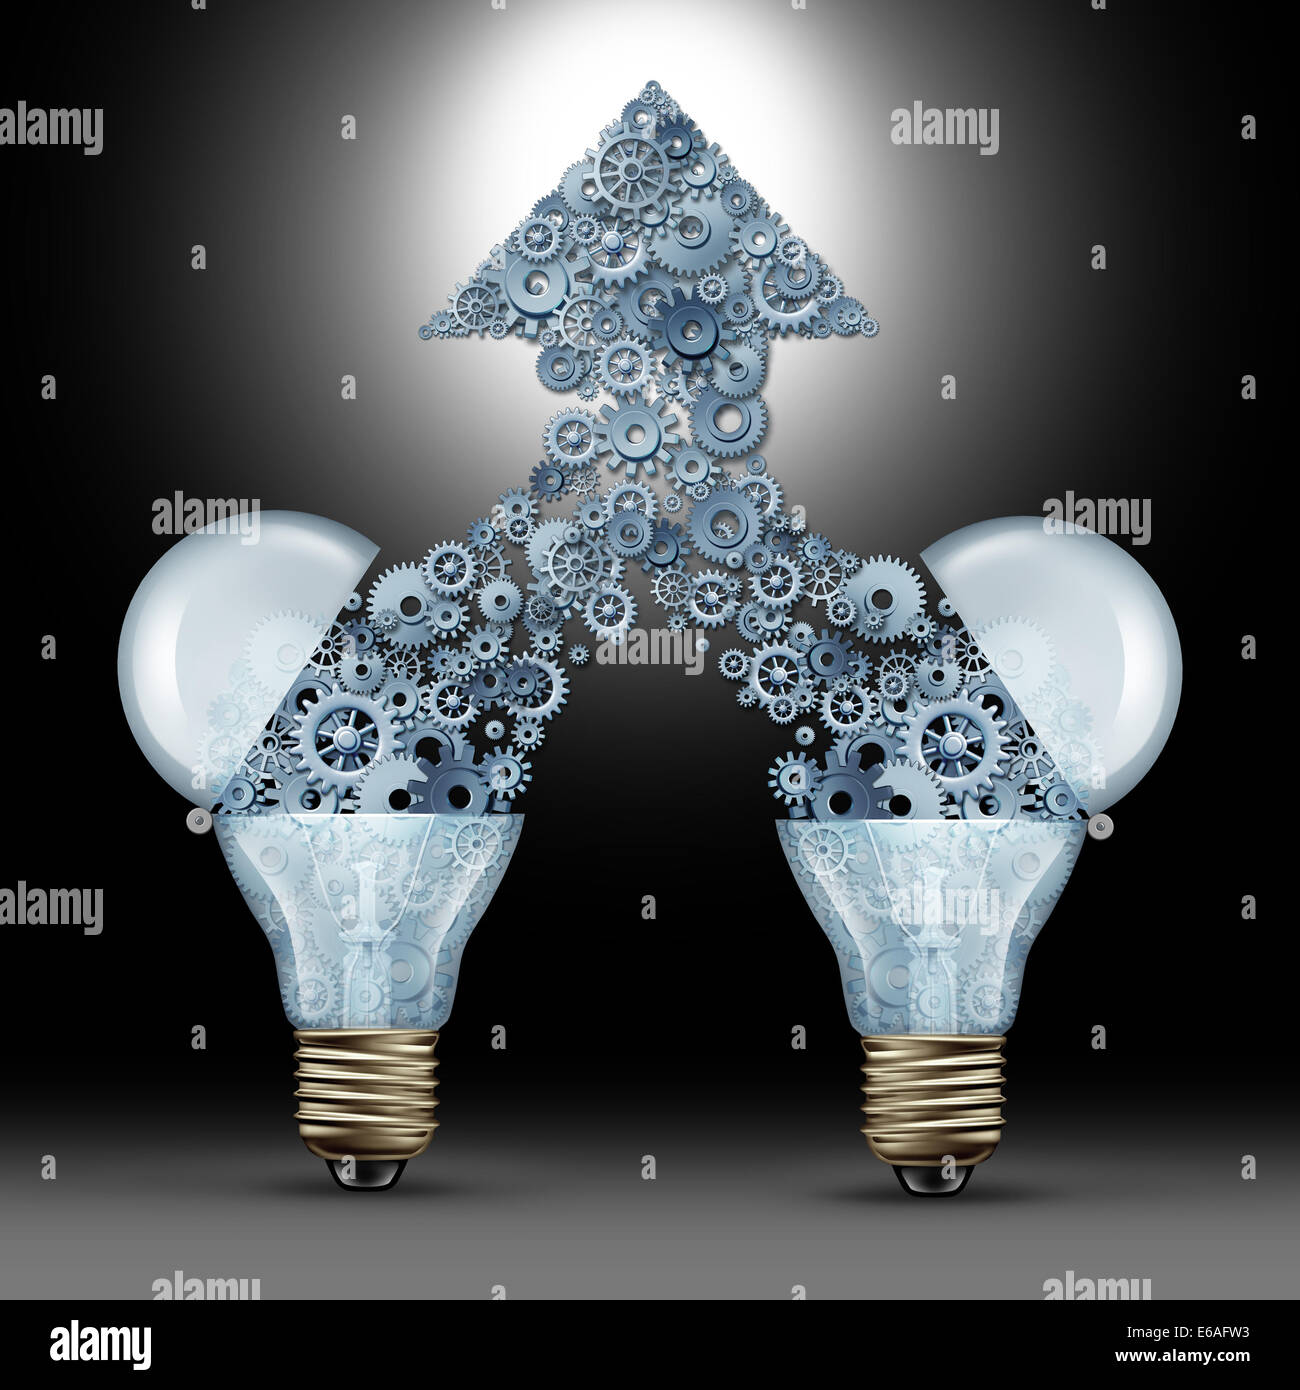 Creative innovation success as two open glass light bulbs releasing gears and cogs coming together in the shape of an upward arrow as a symbol of brainstorming new ideas and technology development. Stock Photo